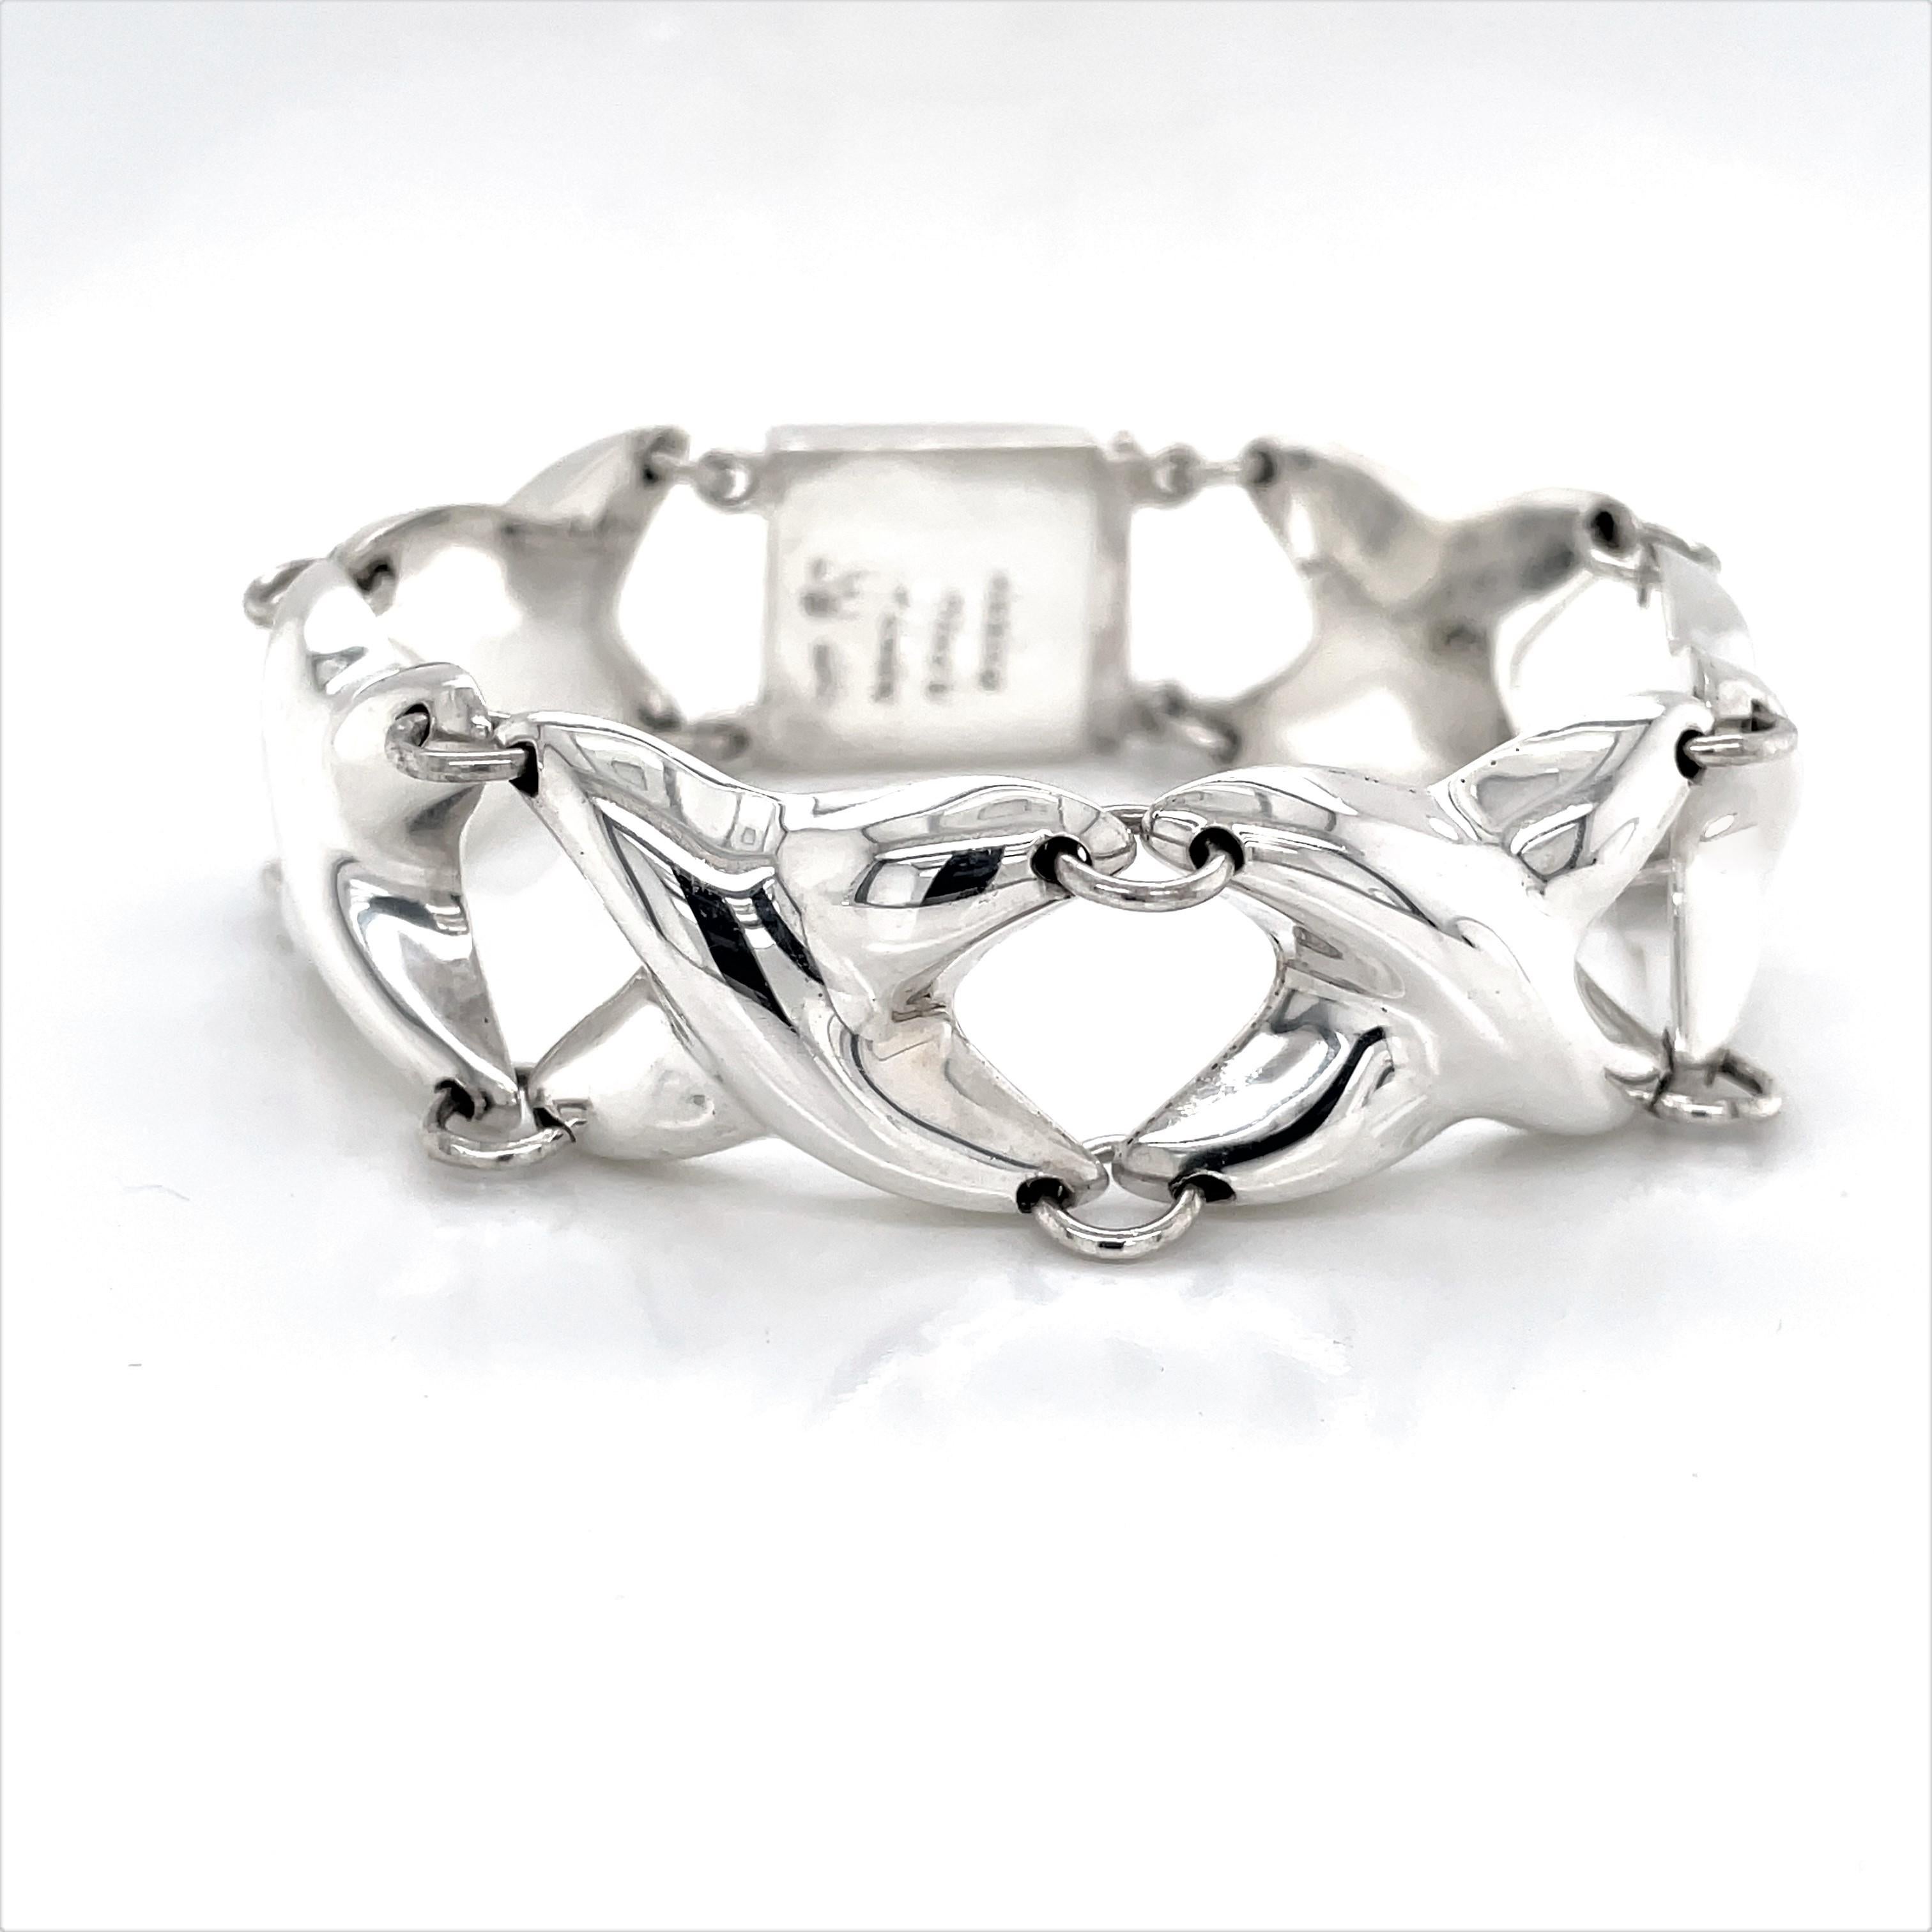 Artfully crafted in Mexico of .925 sterling silver, this bright bracelet has 3/4 inch dimensional links with a whimsical cross like pattern that creates its 7-1/4 inch length. Finished with box clasp.
Gift boxed .